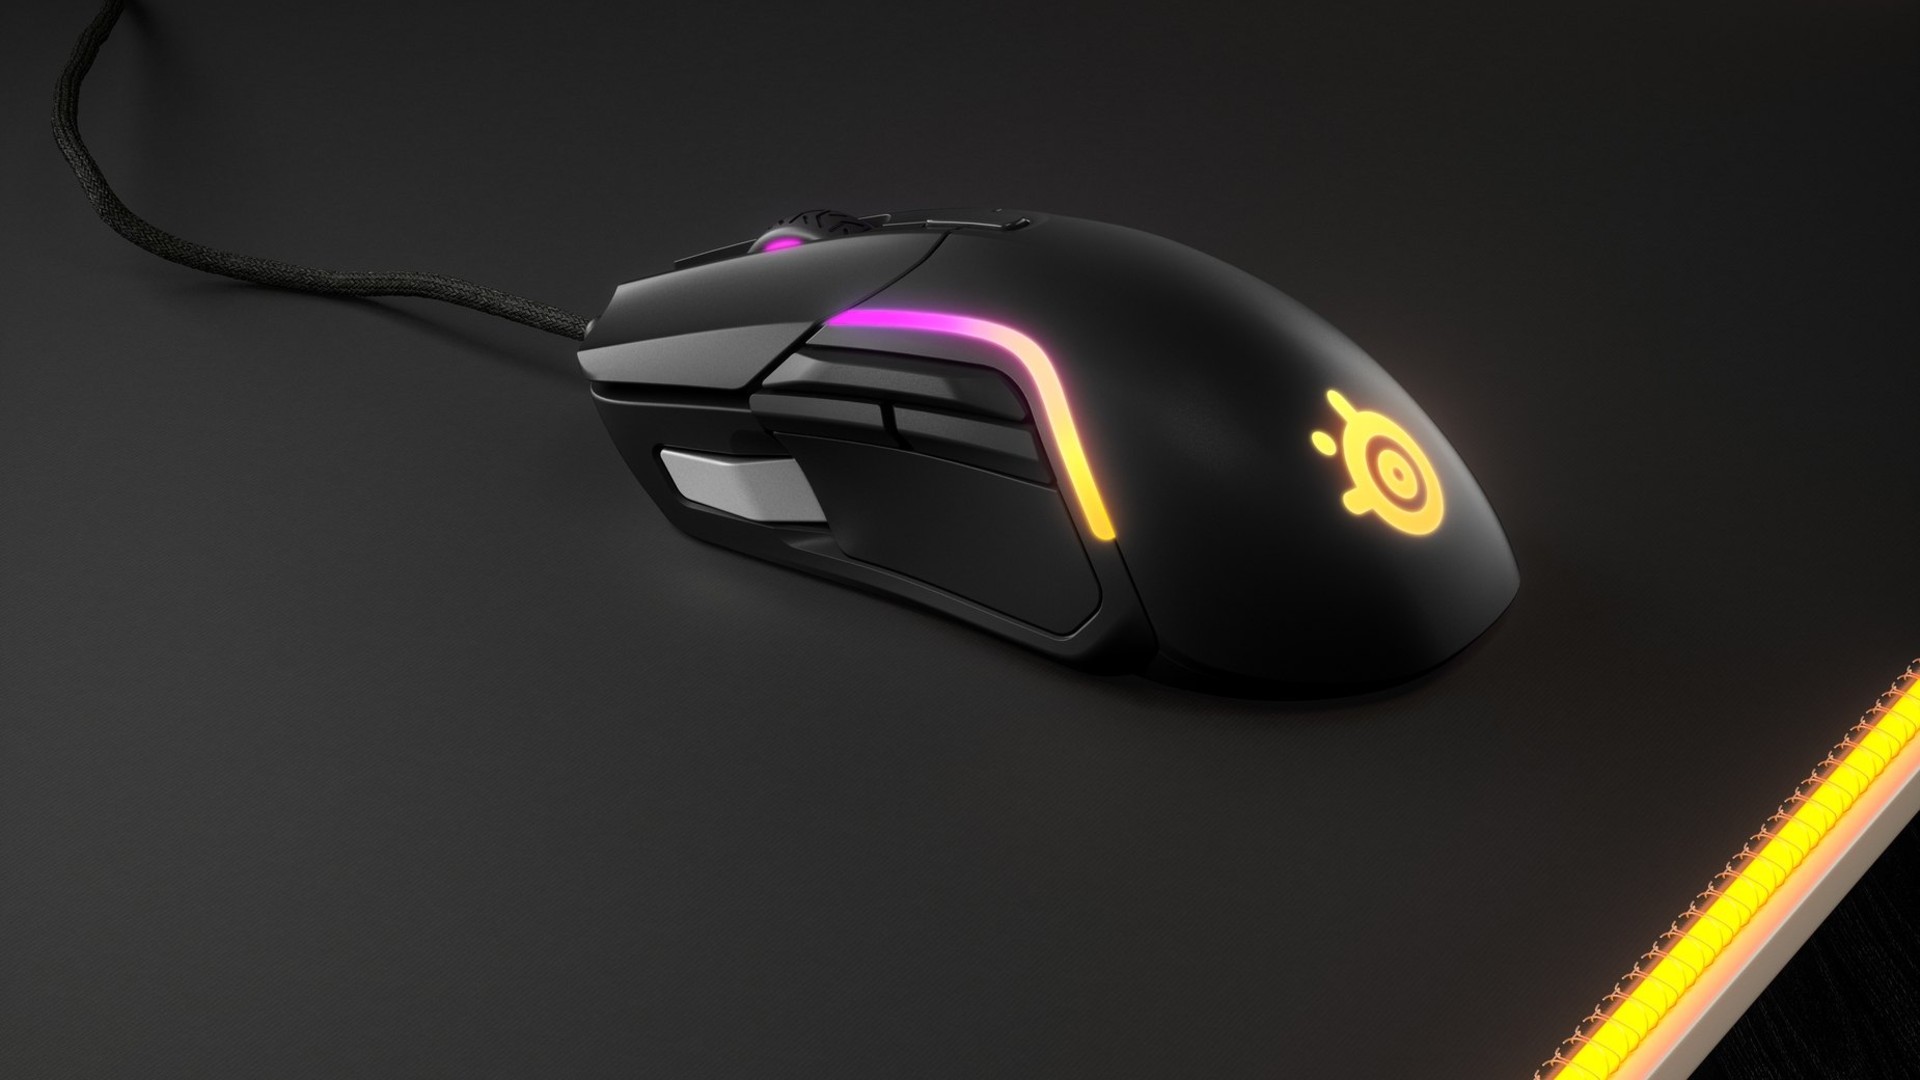 Best gaming mouse 2022 – The top clickers for your setup